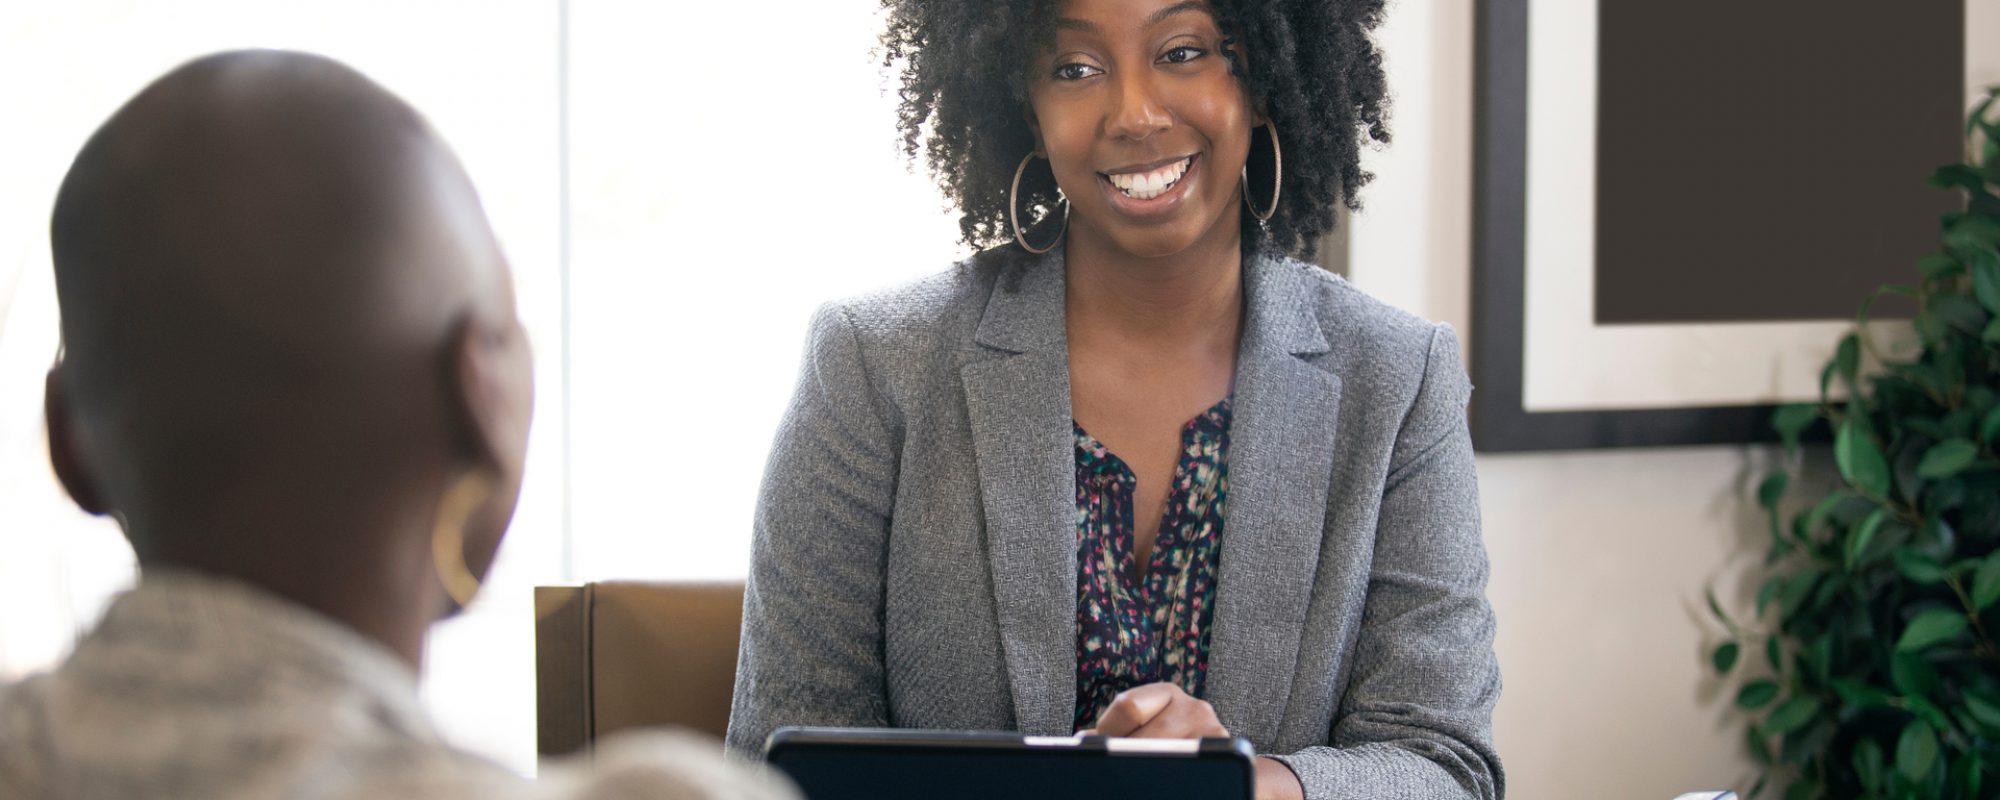 Black female businesswoman in an office with a client giving legal advice about taxes or financial loans. The woman could be a lawyer or a cpa accountant.; Shutterstock ID 1344795773; Purchase Order: comps; Job: ; Client/Licensee: ; Other: